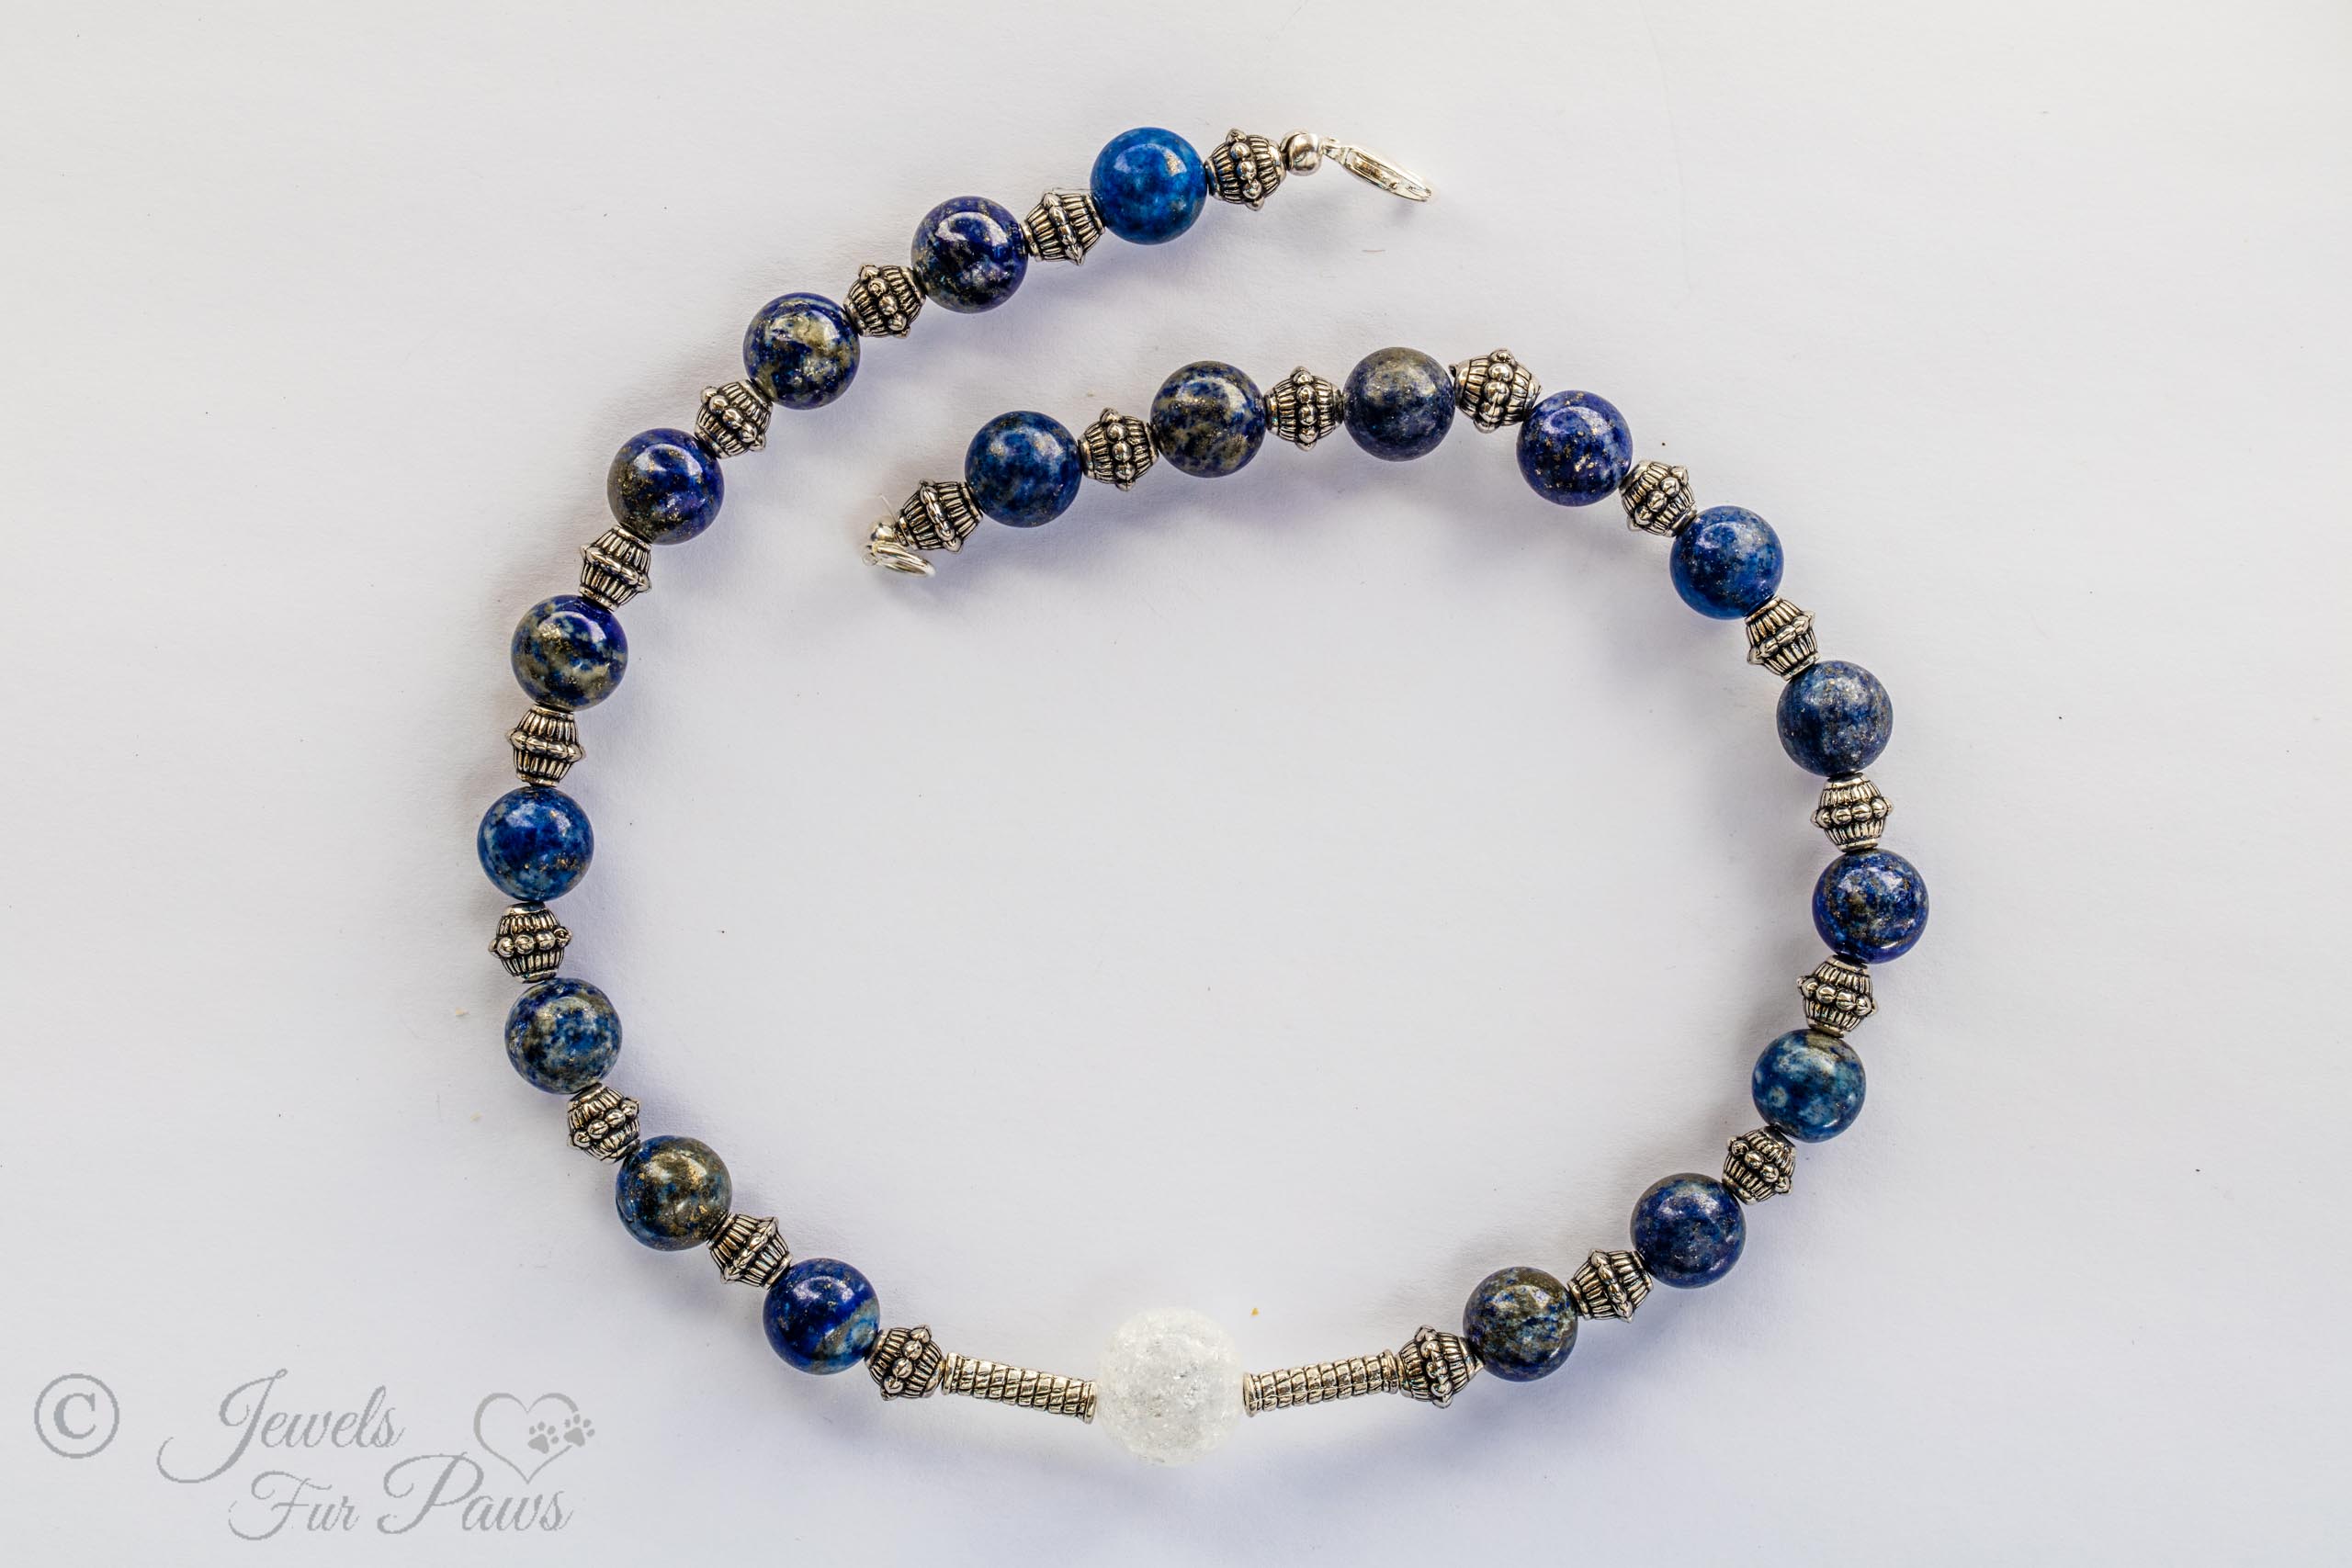 blue lapis lazuli necklace with cracked glass bauble in center on white background